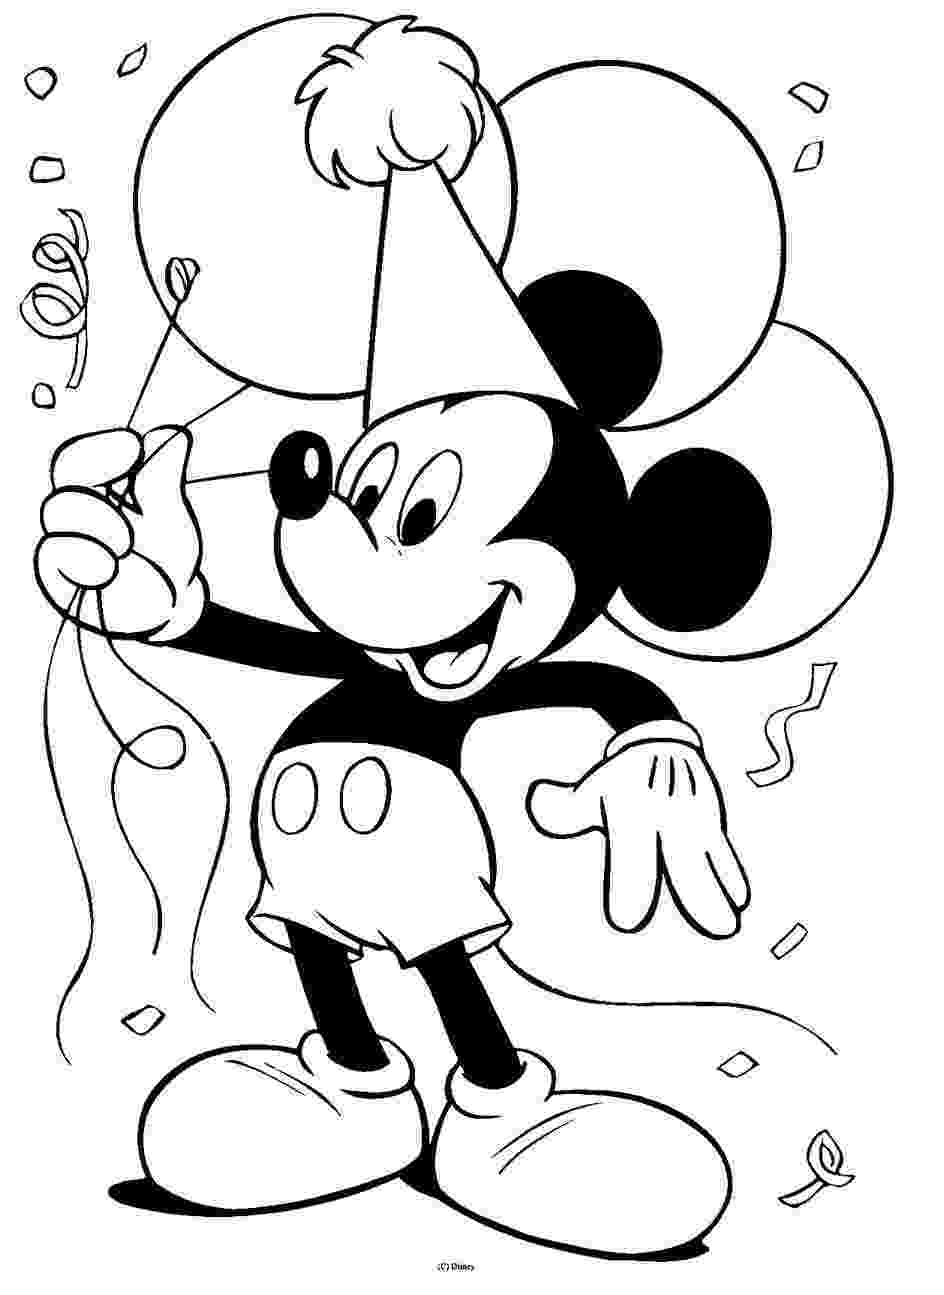 mickey mouse coloring page mickey mouse coloring pages 2018 dr odd mickey mouse coloring page 